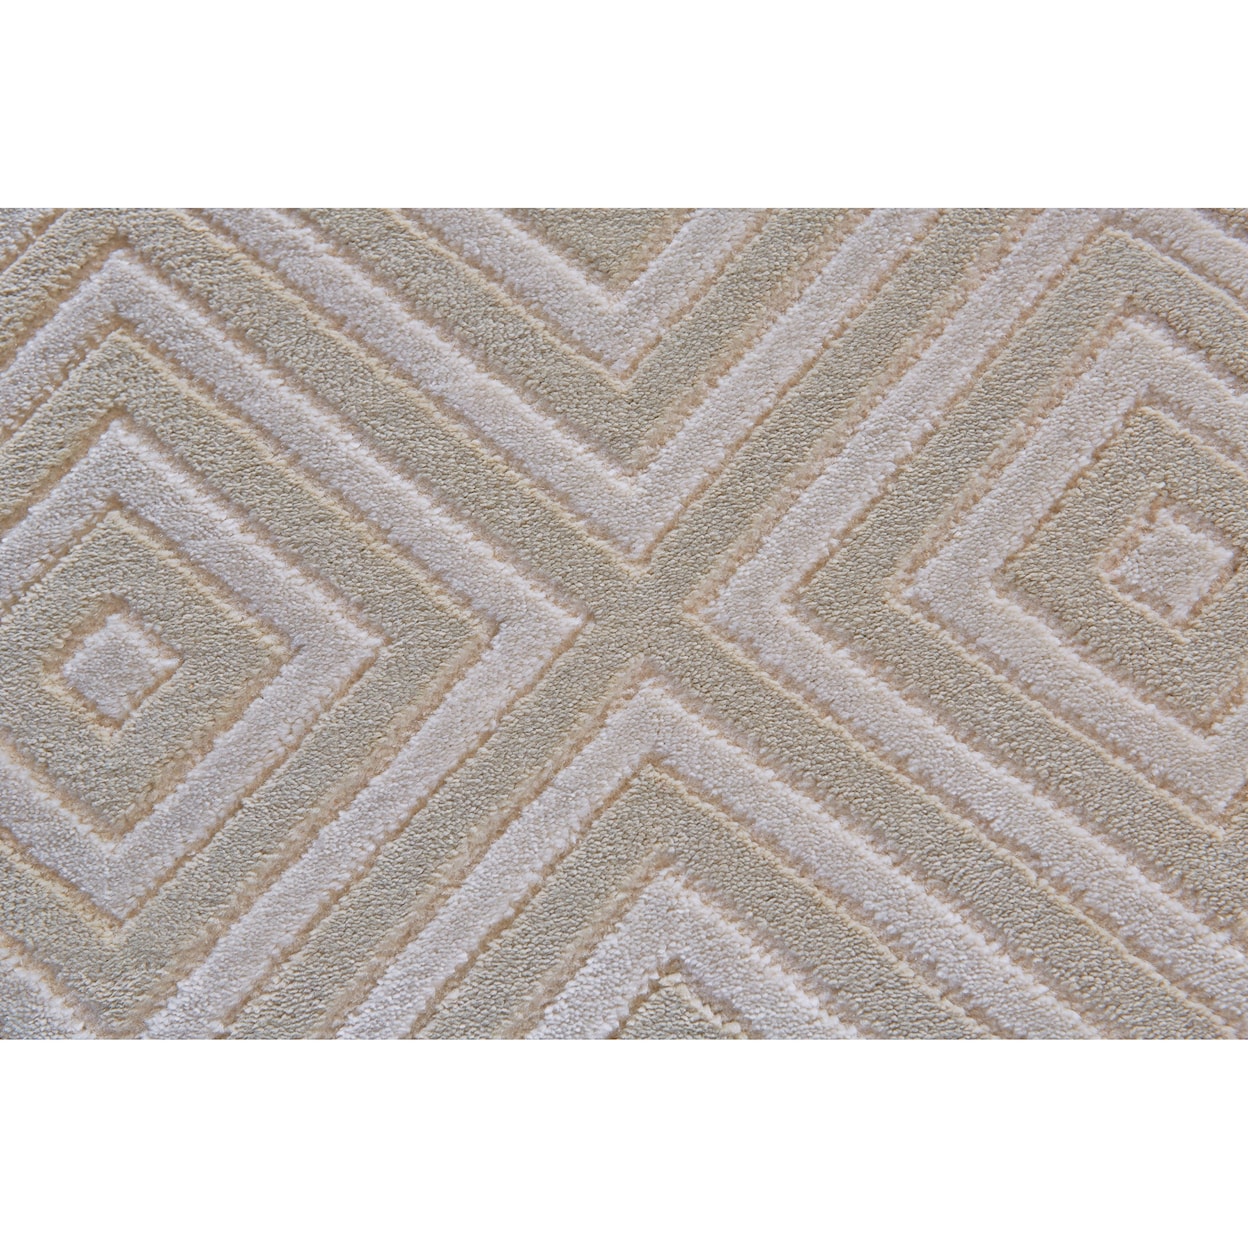 Feizy Rugs Melina Birch/Taupe 5' x 8' Area Rug